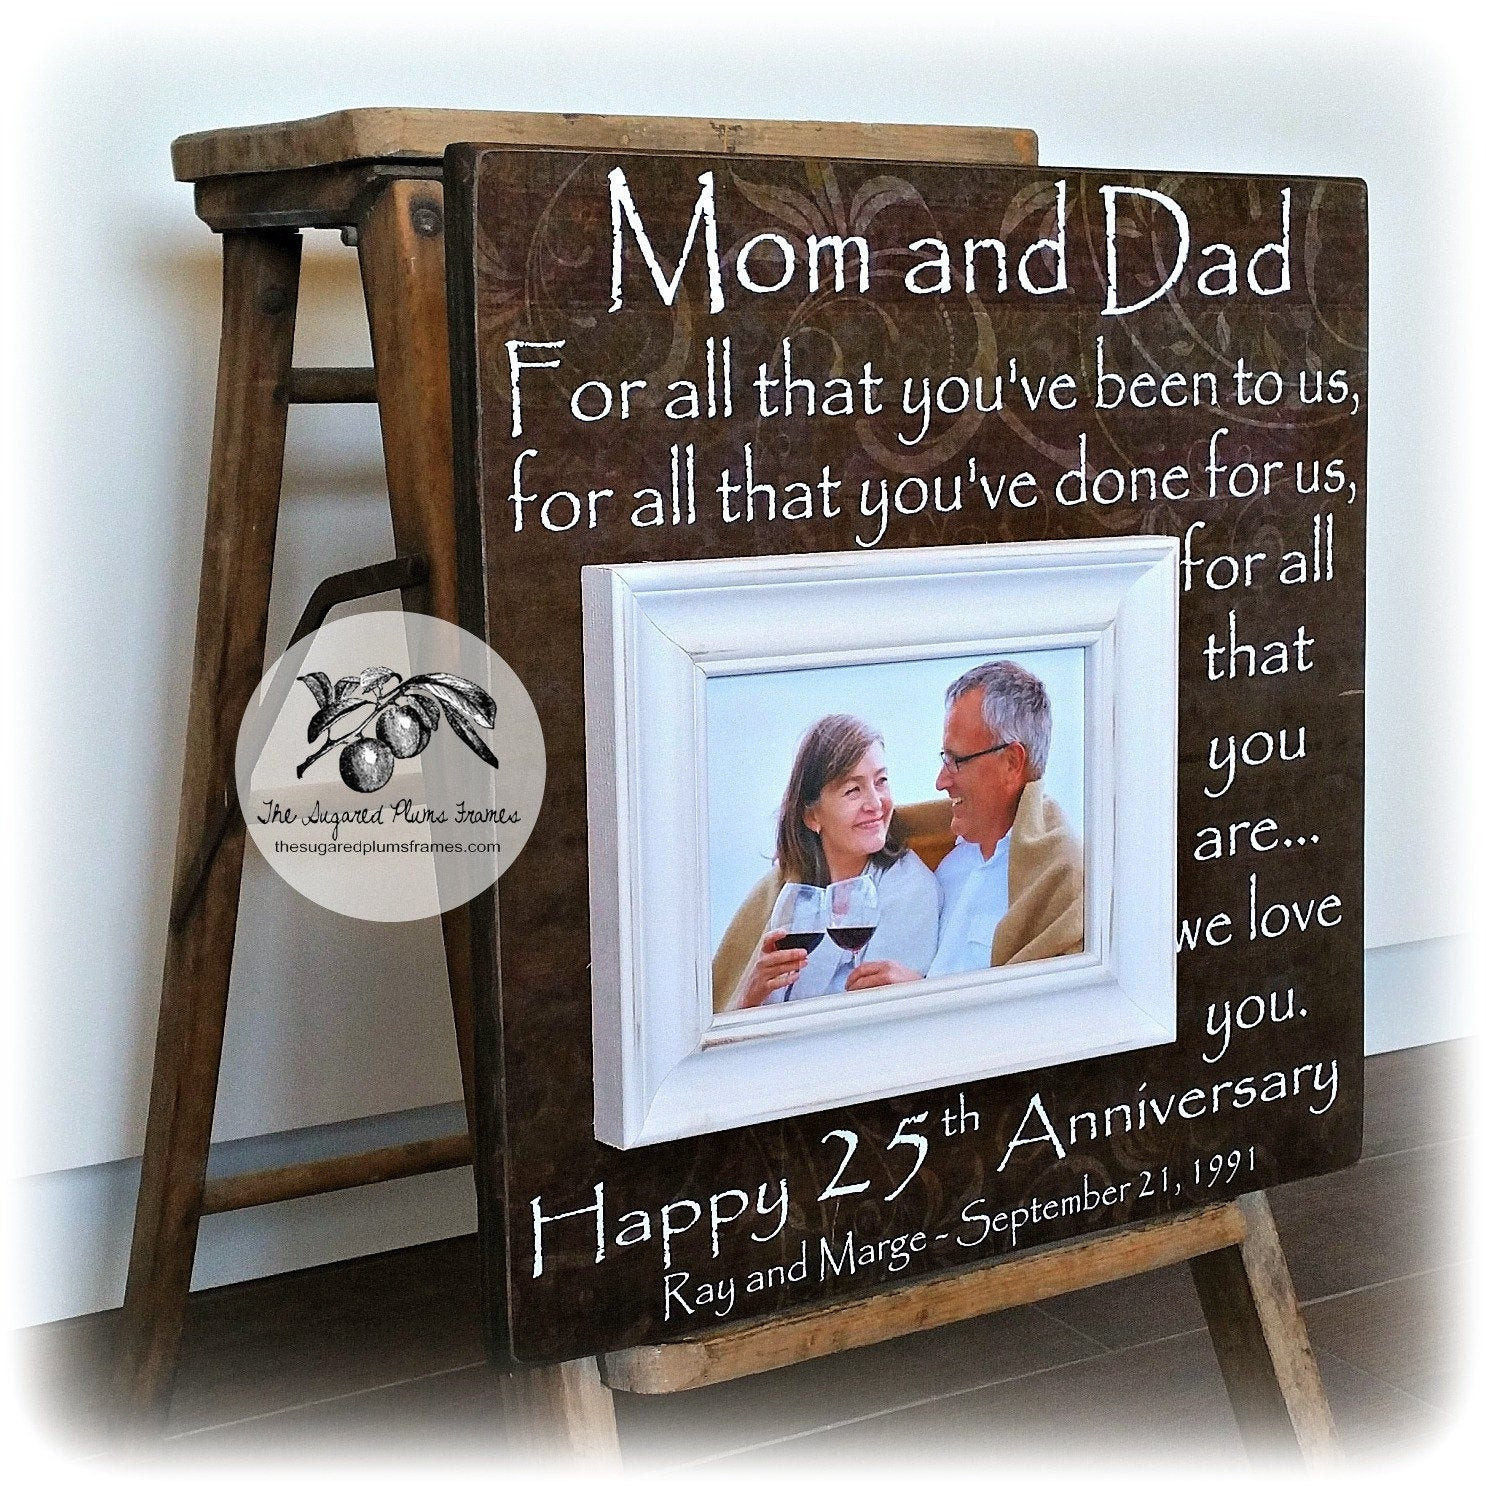 Gift Ideas For Parents 50Th Anniversary
 25th Anniversary Gifts for Parents Silver Anniversary Gift